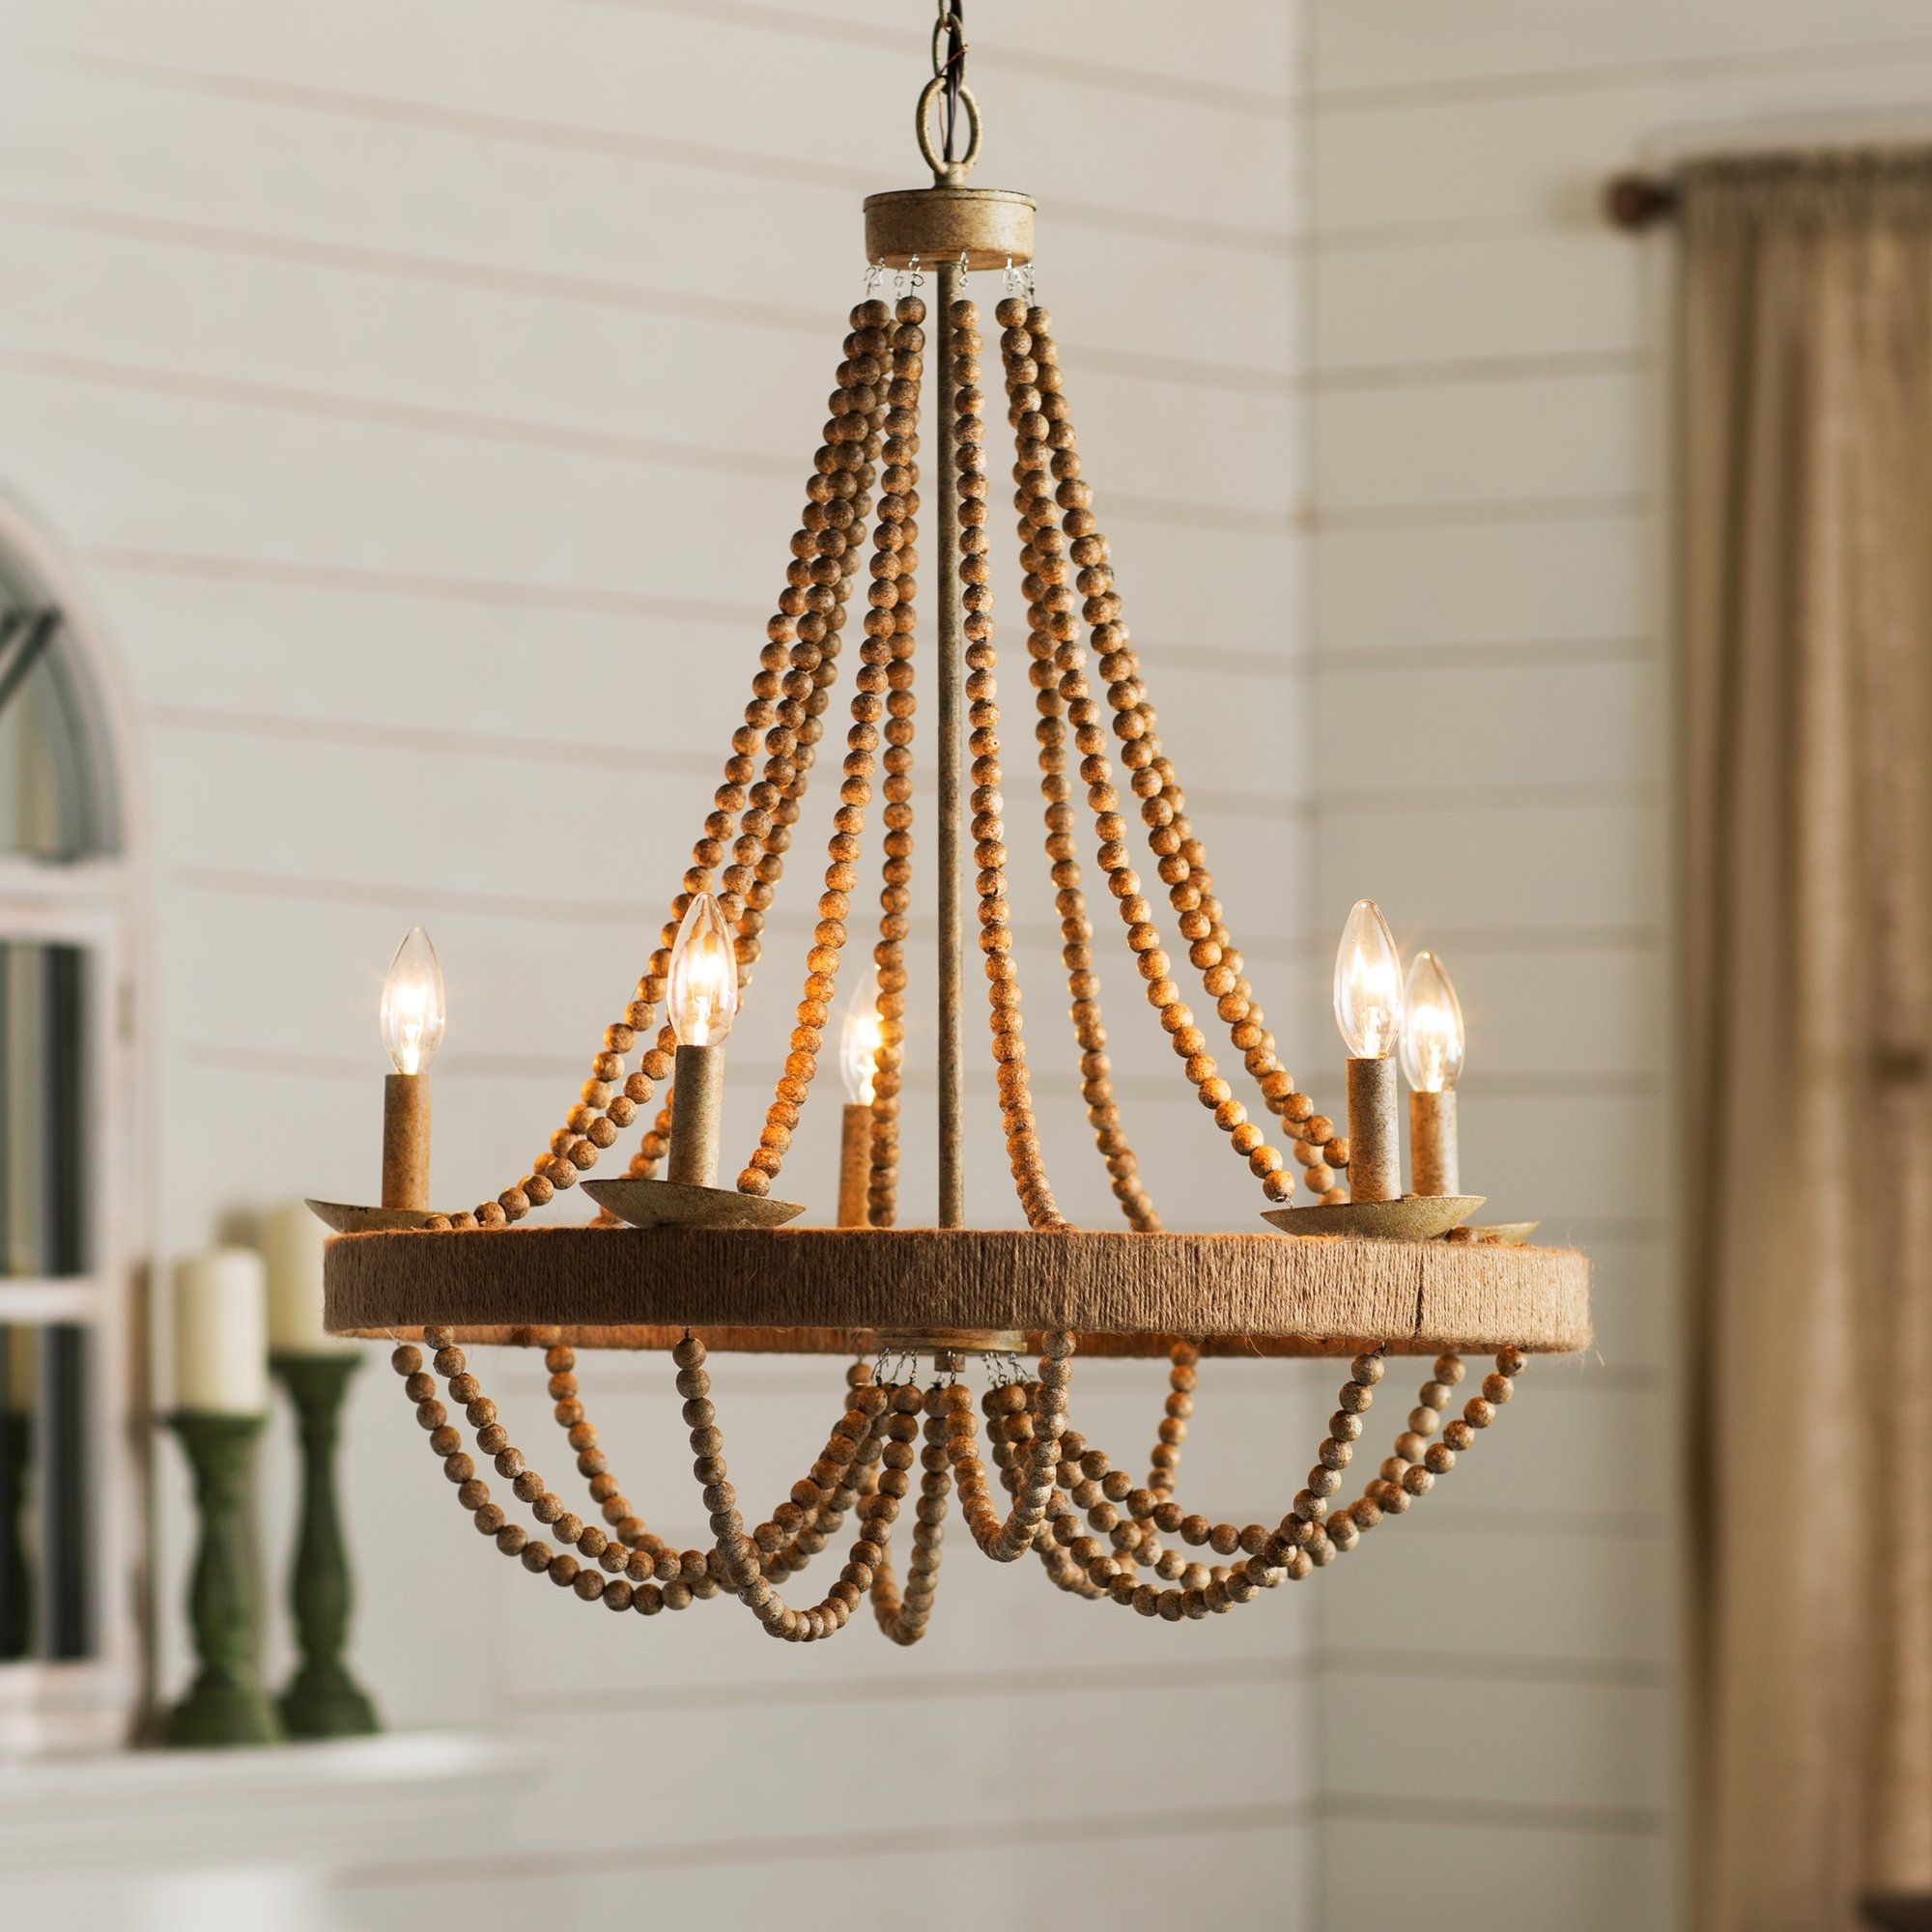 Lantieri 5 Light Candle Chandelier Reviews Joss Main In Candle Chandelier (Photo 5 of 15)